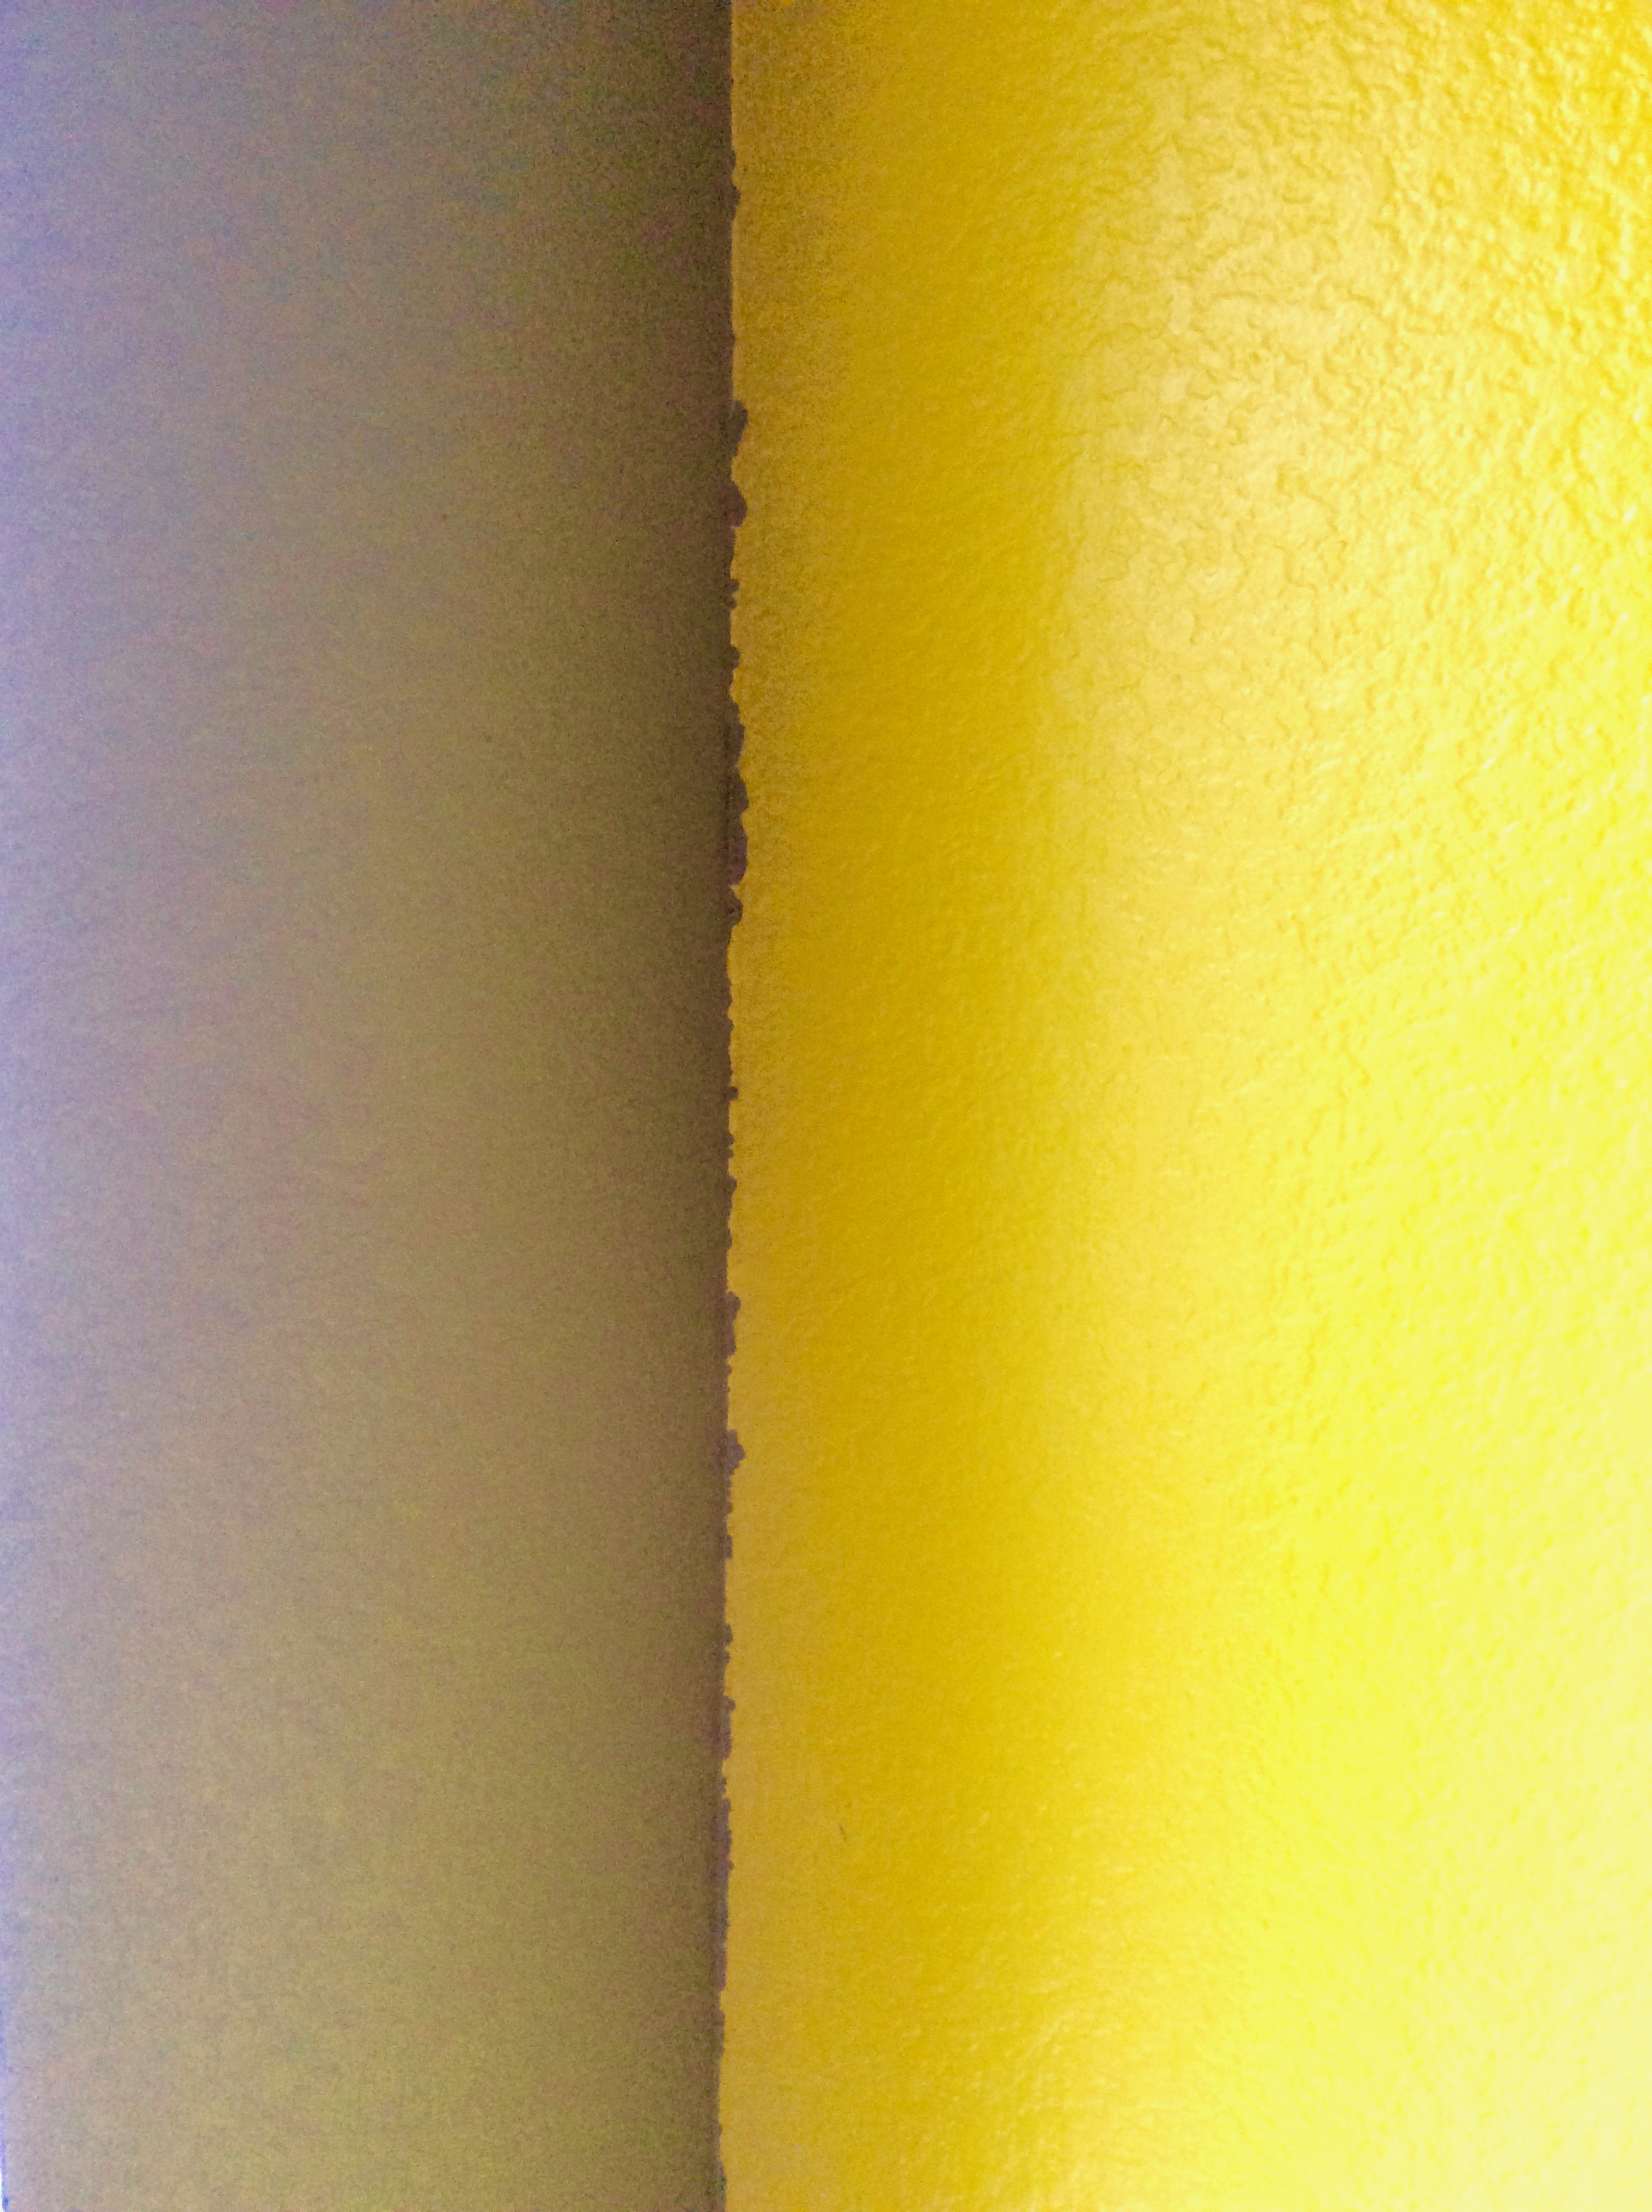 An messy paint corner where a yellow wall meets a camp green wall